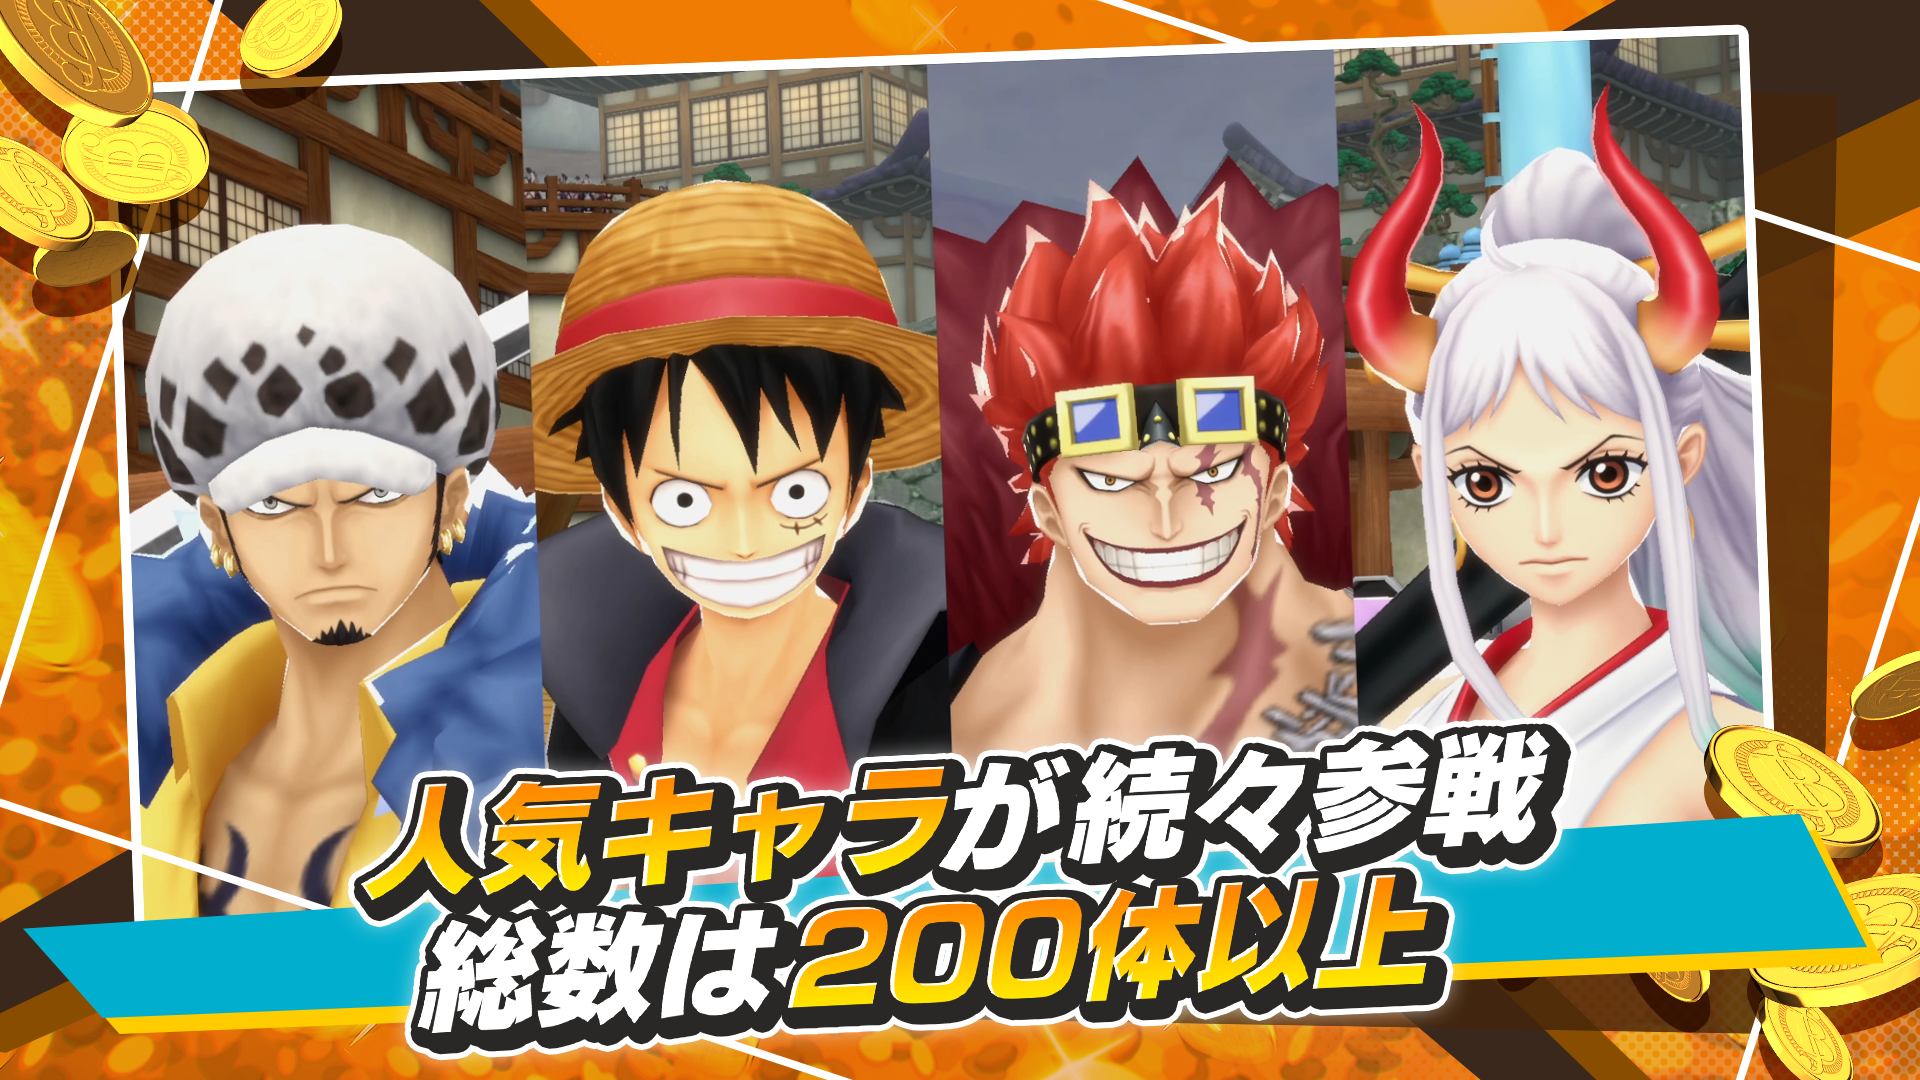 NEW GAME) ONE PIECE PROJECT FIGHTER FIRST LOOK GAMEPLAY! (Android